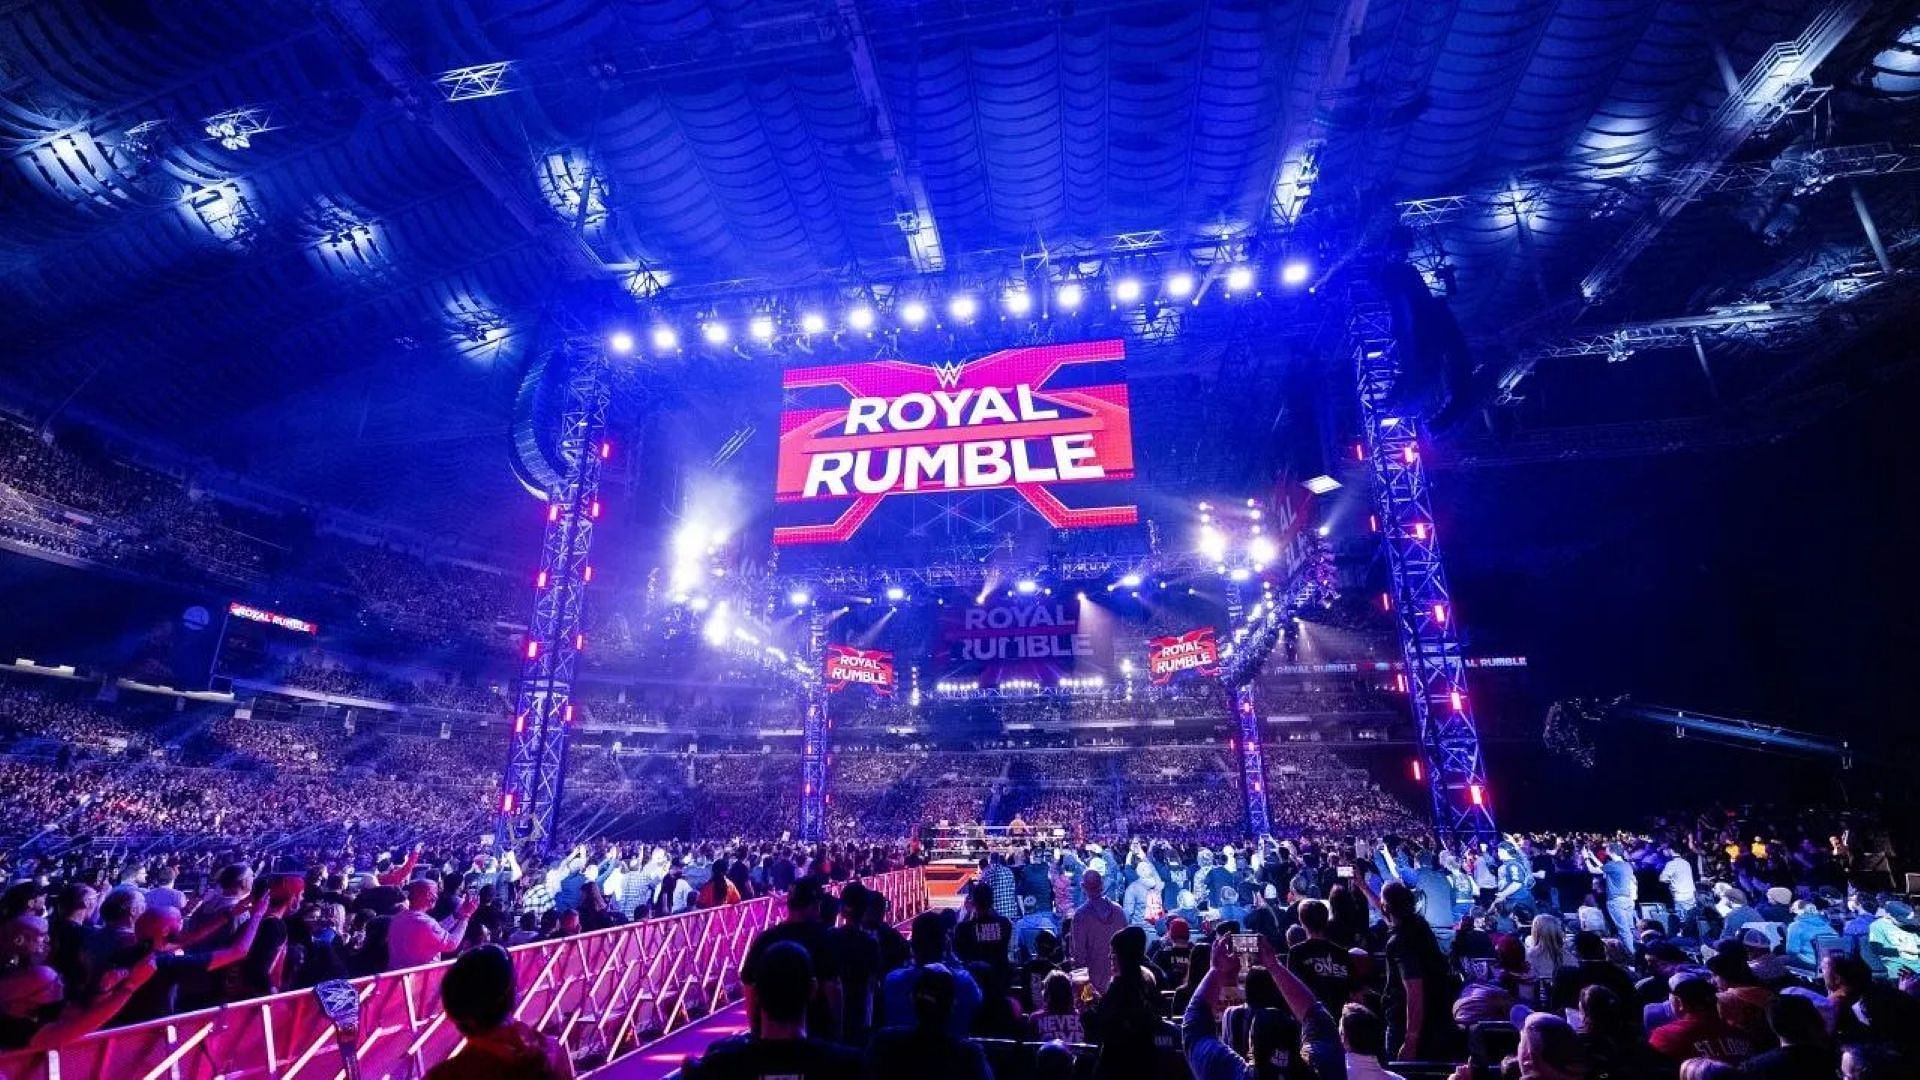 The WWE Royal Rumble ring on display